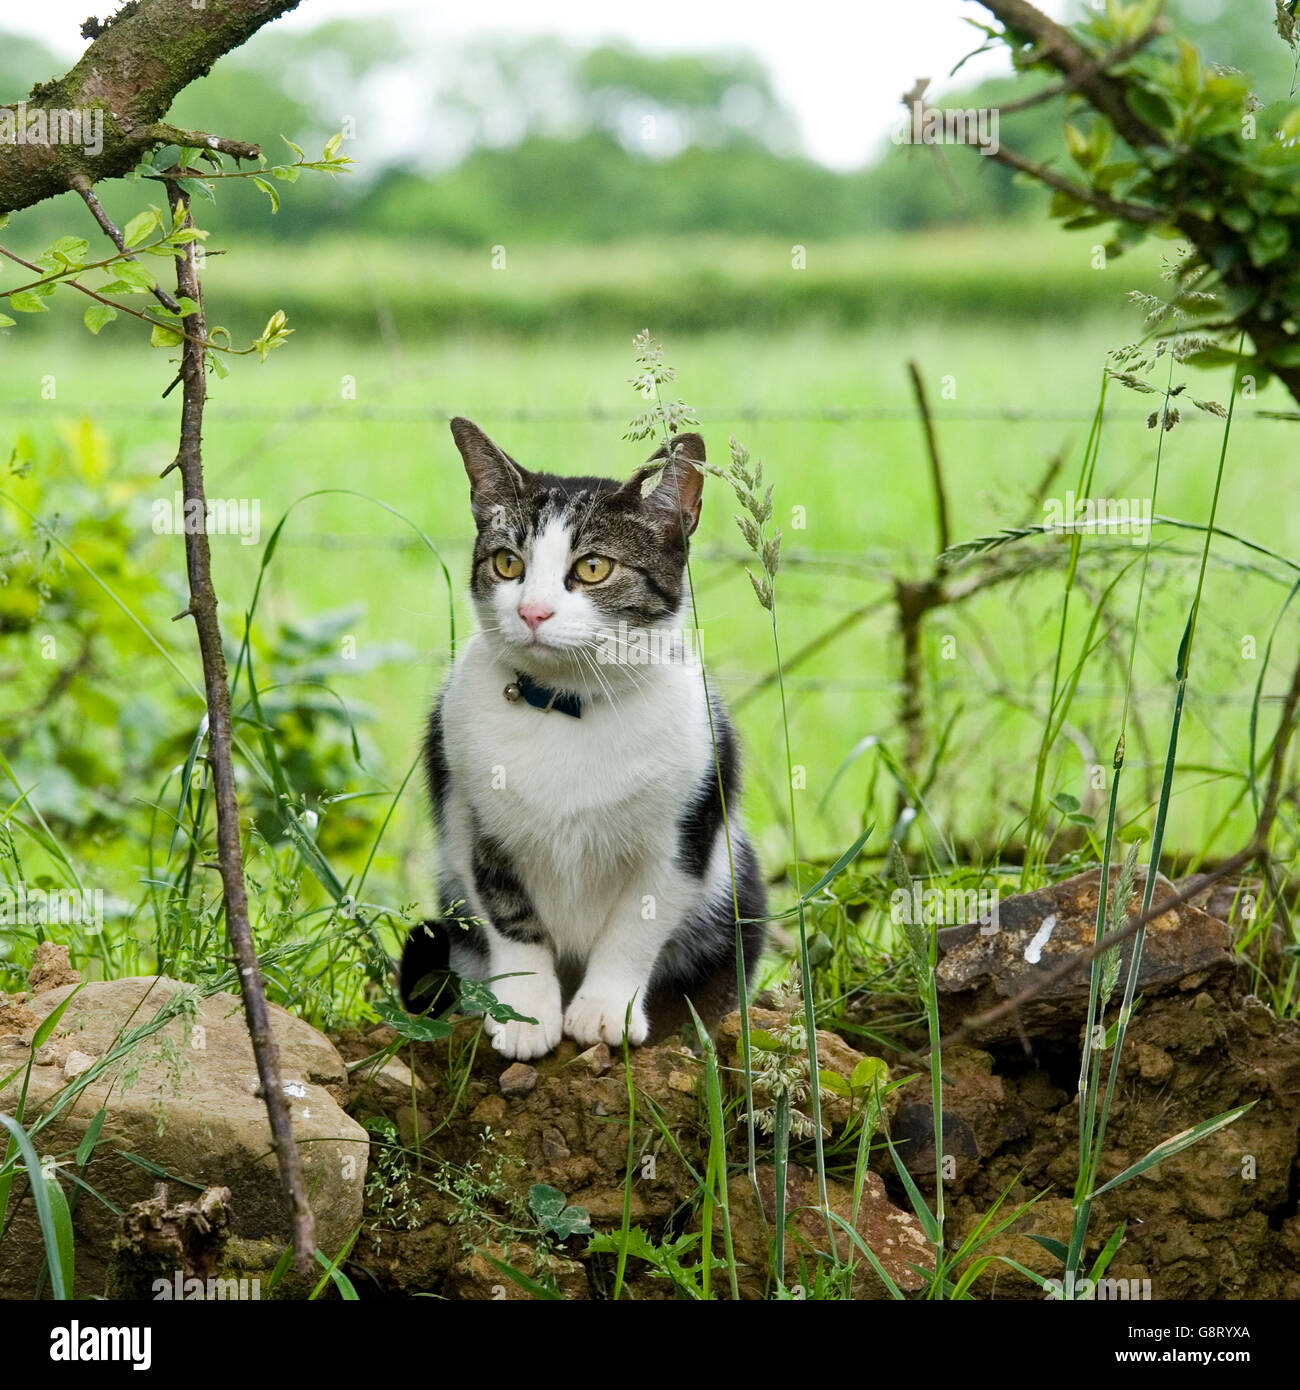 Cat sitting in grass Banque D'Images